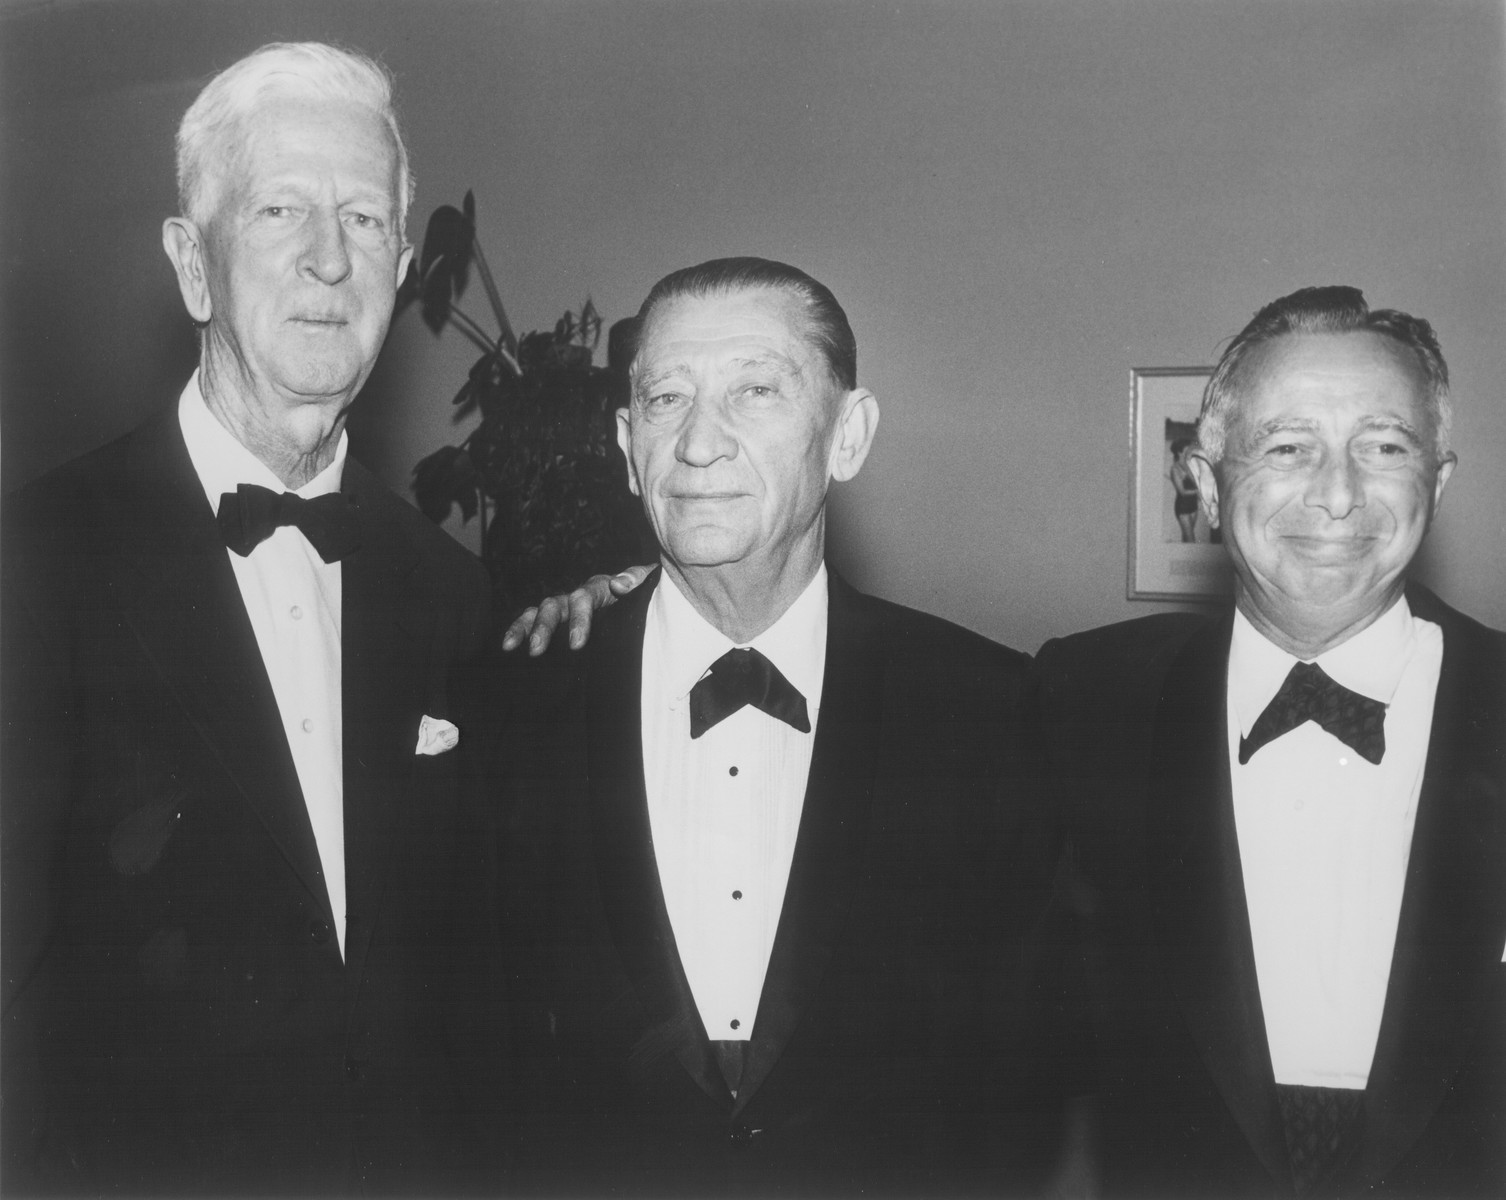 American Jewish philanthropist Abraham S. Kay (center) poses with James G. McDonald (left) and Samuel Sugar (right) at an affair in Washington, D.C.